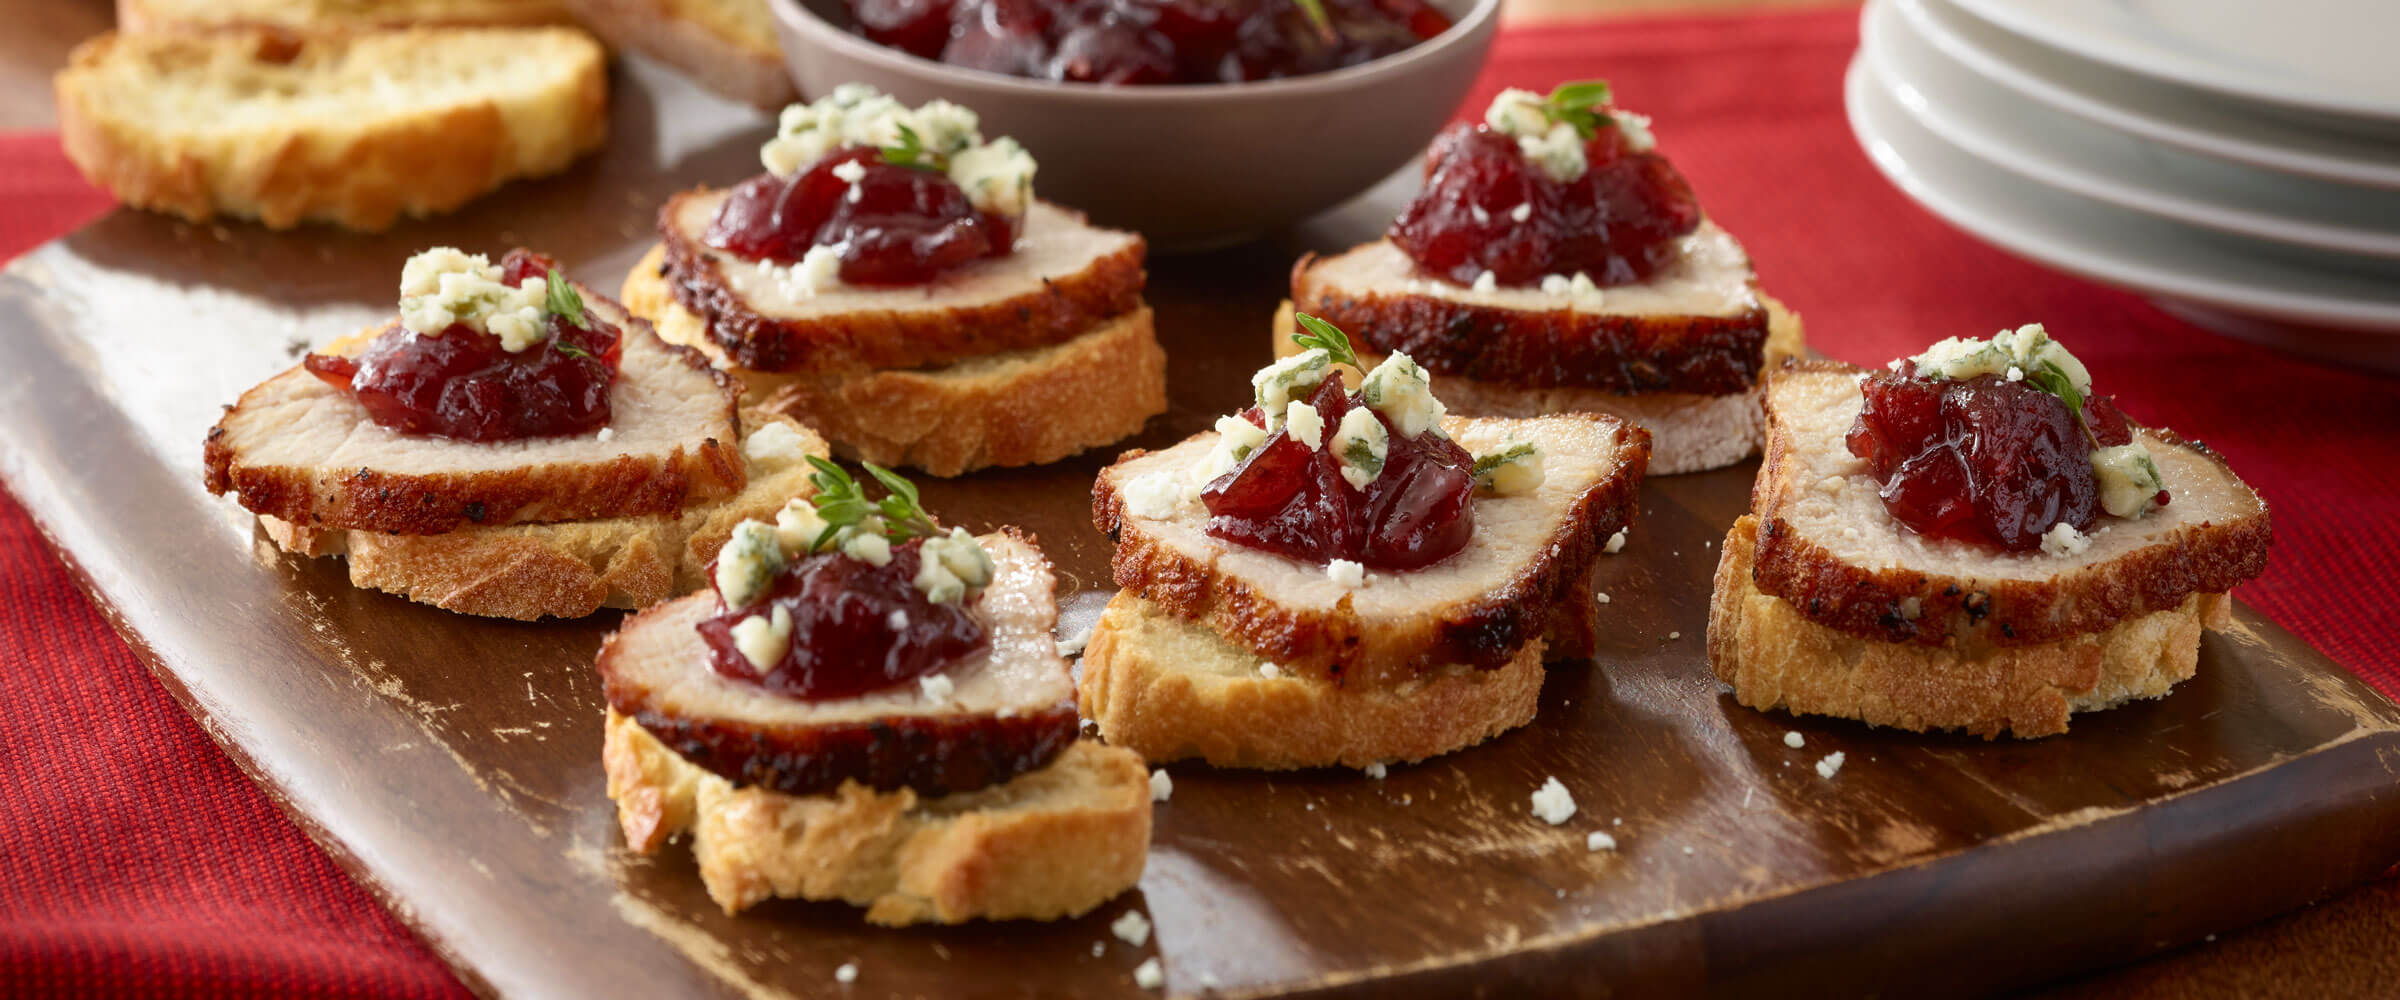 Pork and Apple-Cranberry Chutney Crostini bites on wood board on red tablecloth